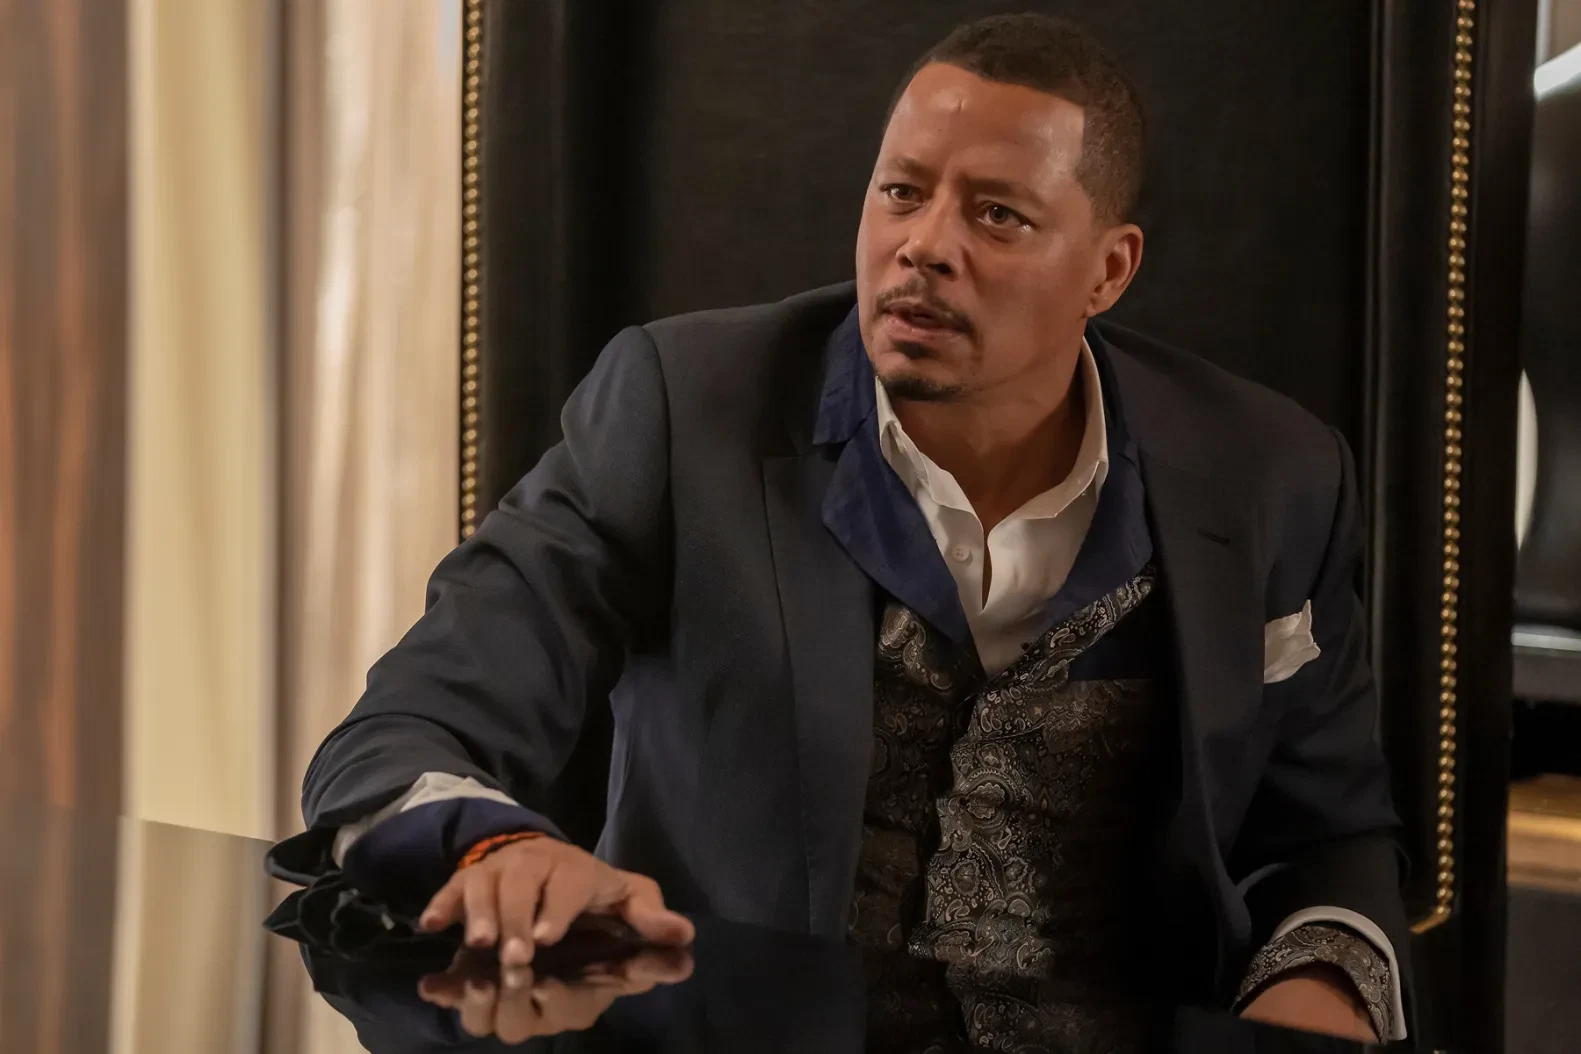 Terrence Howard as Lucious Lyon in the TV show Empire